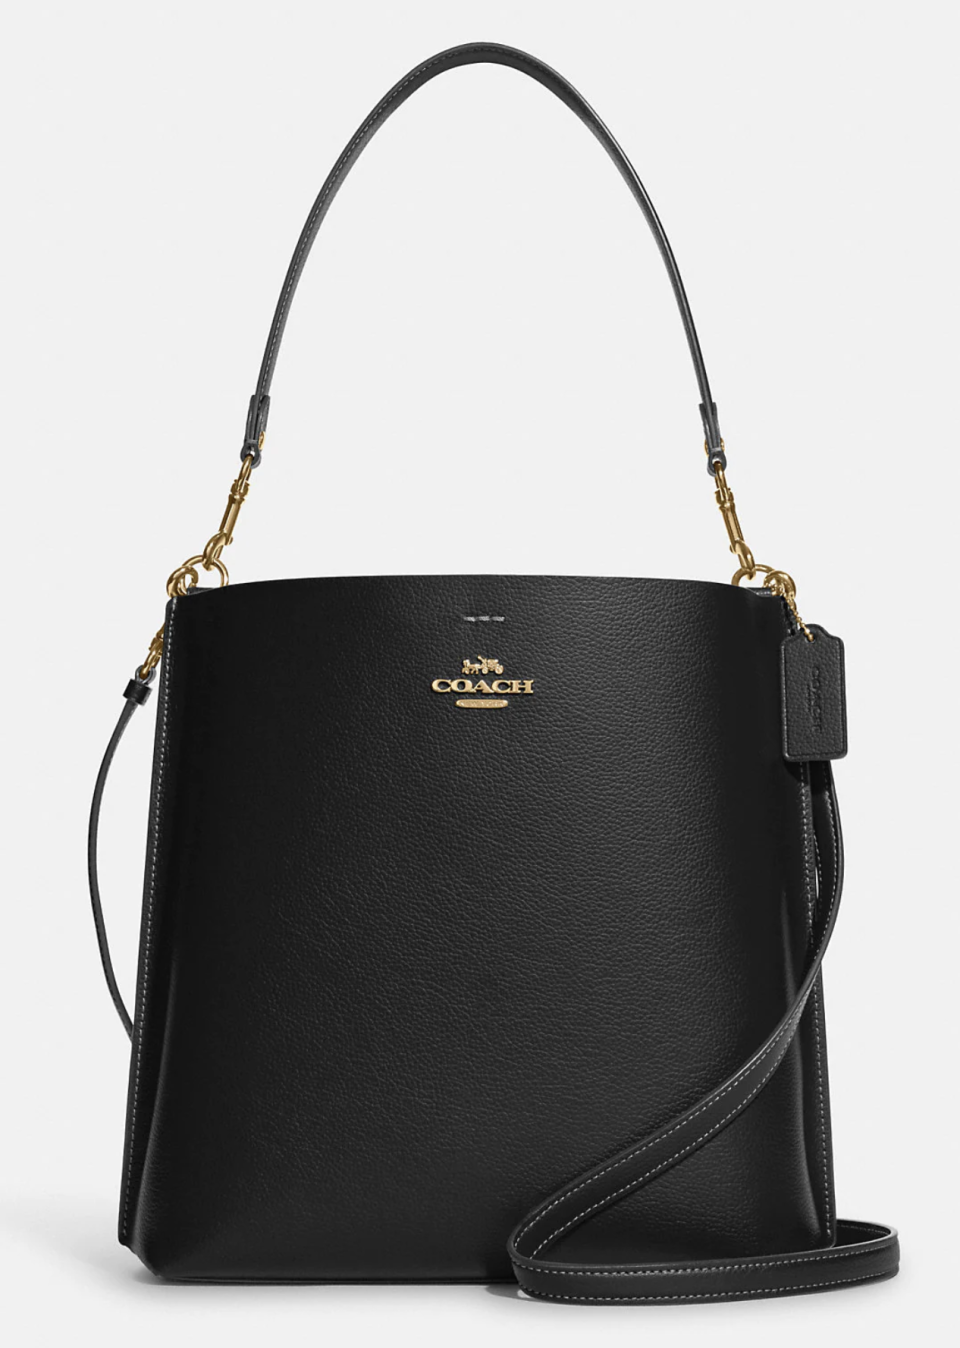 Mollie Bucket Bag in black on white background (photo via Coach Outlet)